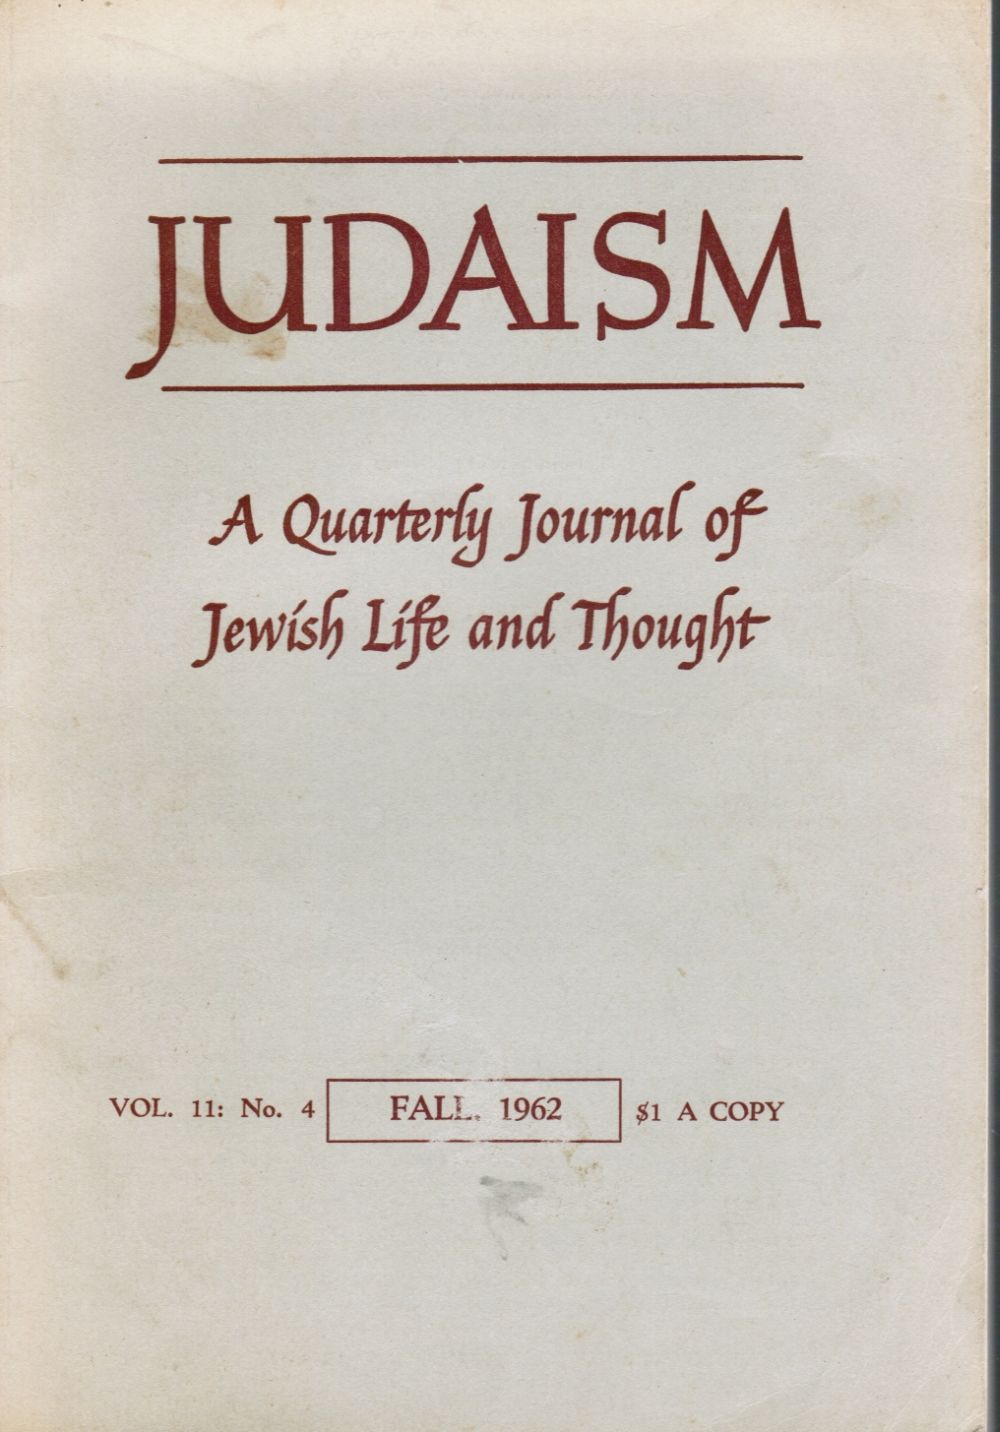 FELIX A. LEVY, EDITOR - Judaism -- a Quarterly Journal of Jewish Life and Thought: Vol 11, No. 4, Fall 1962 Allen Ginsberg, Isaac Bashevis Singer,